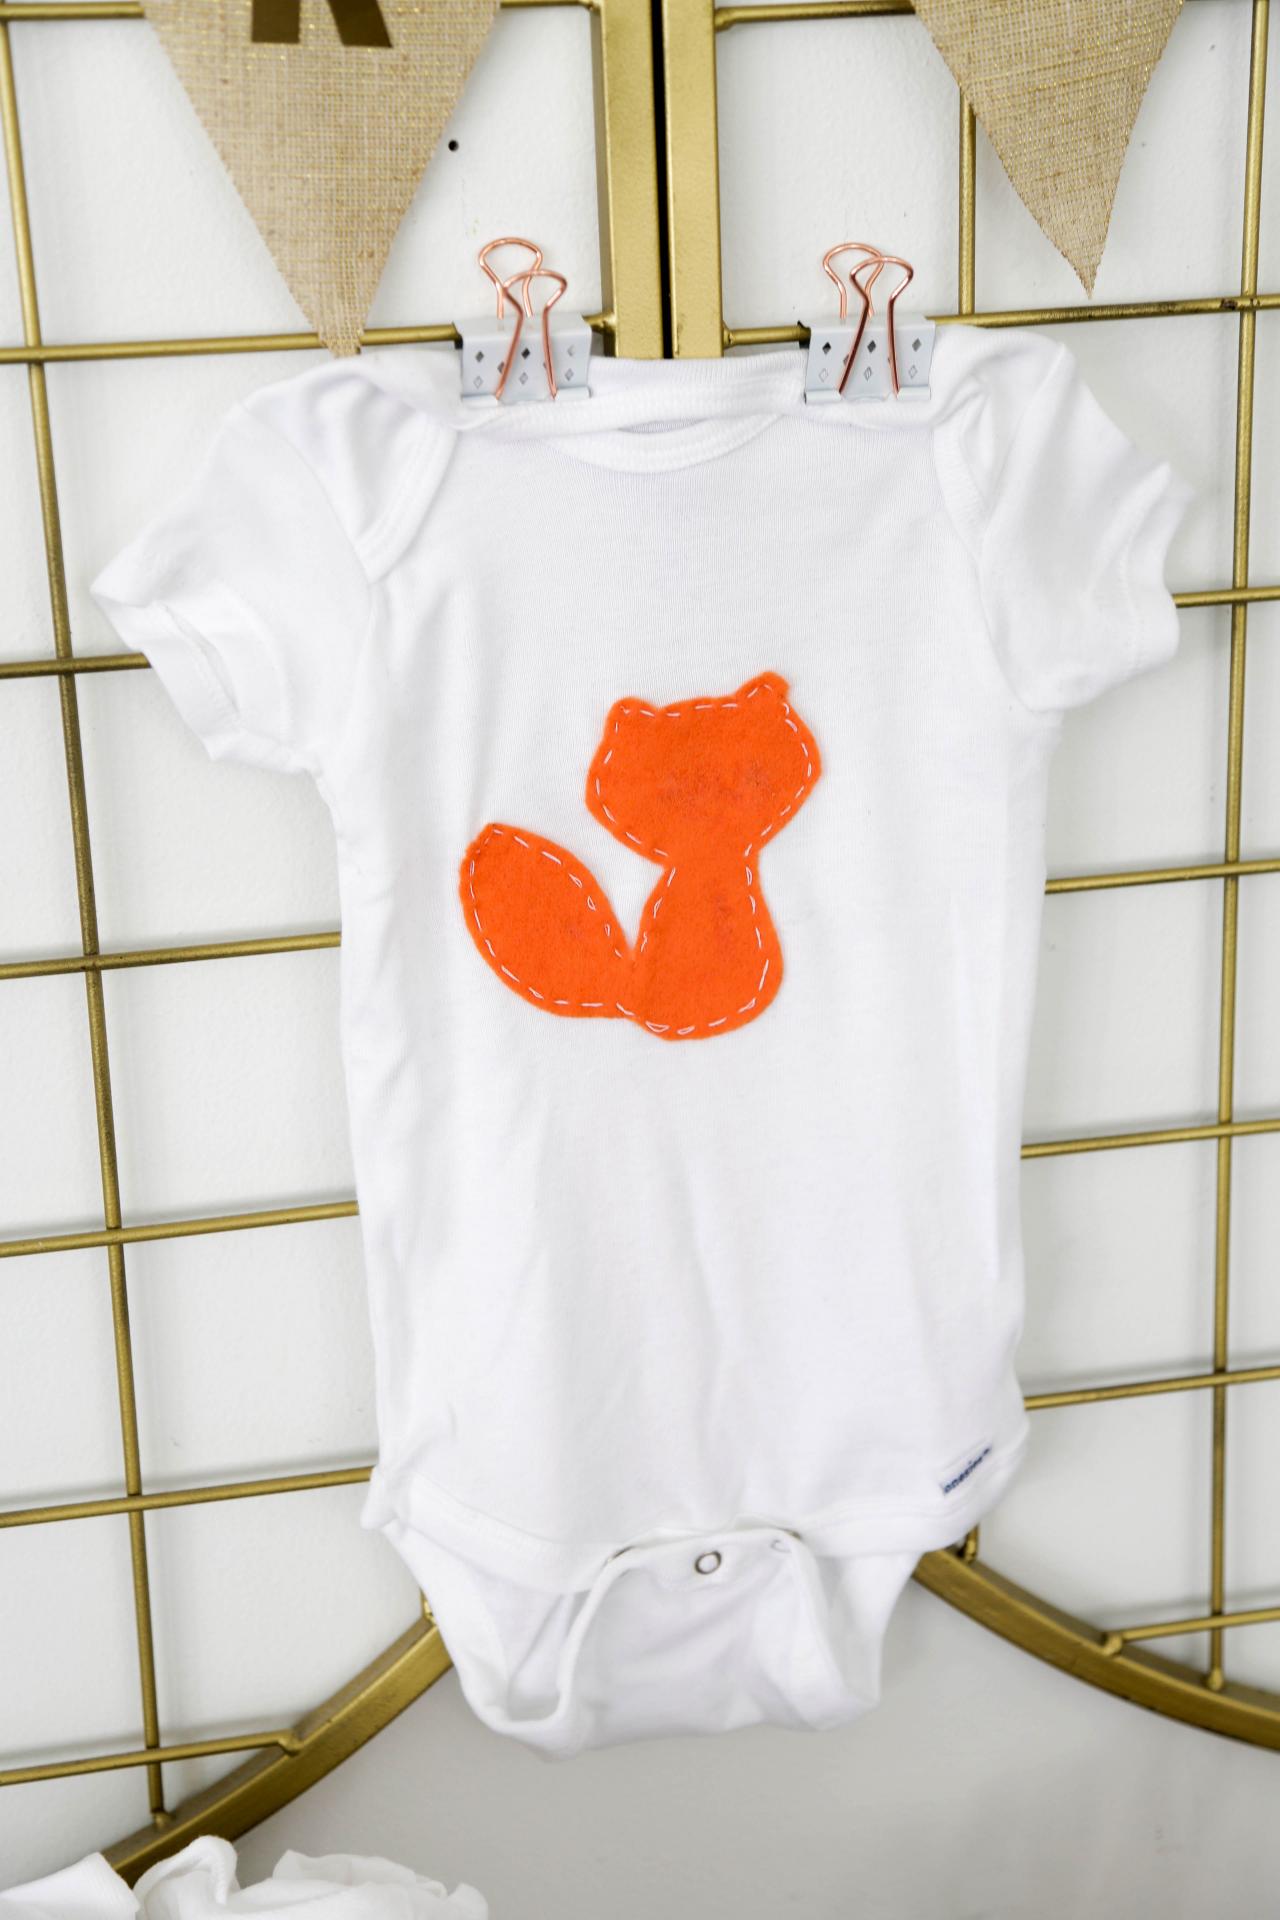 Awkward Styles I Love My Step Mother Baby One Piece Baby Gifts Lovely Bodysuit 